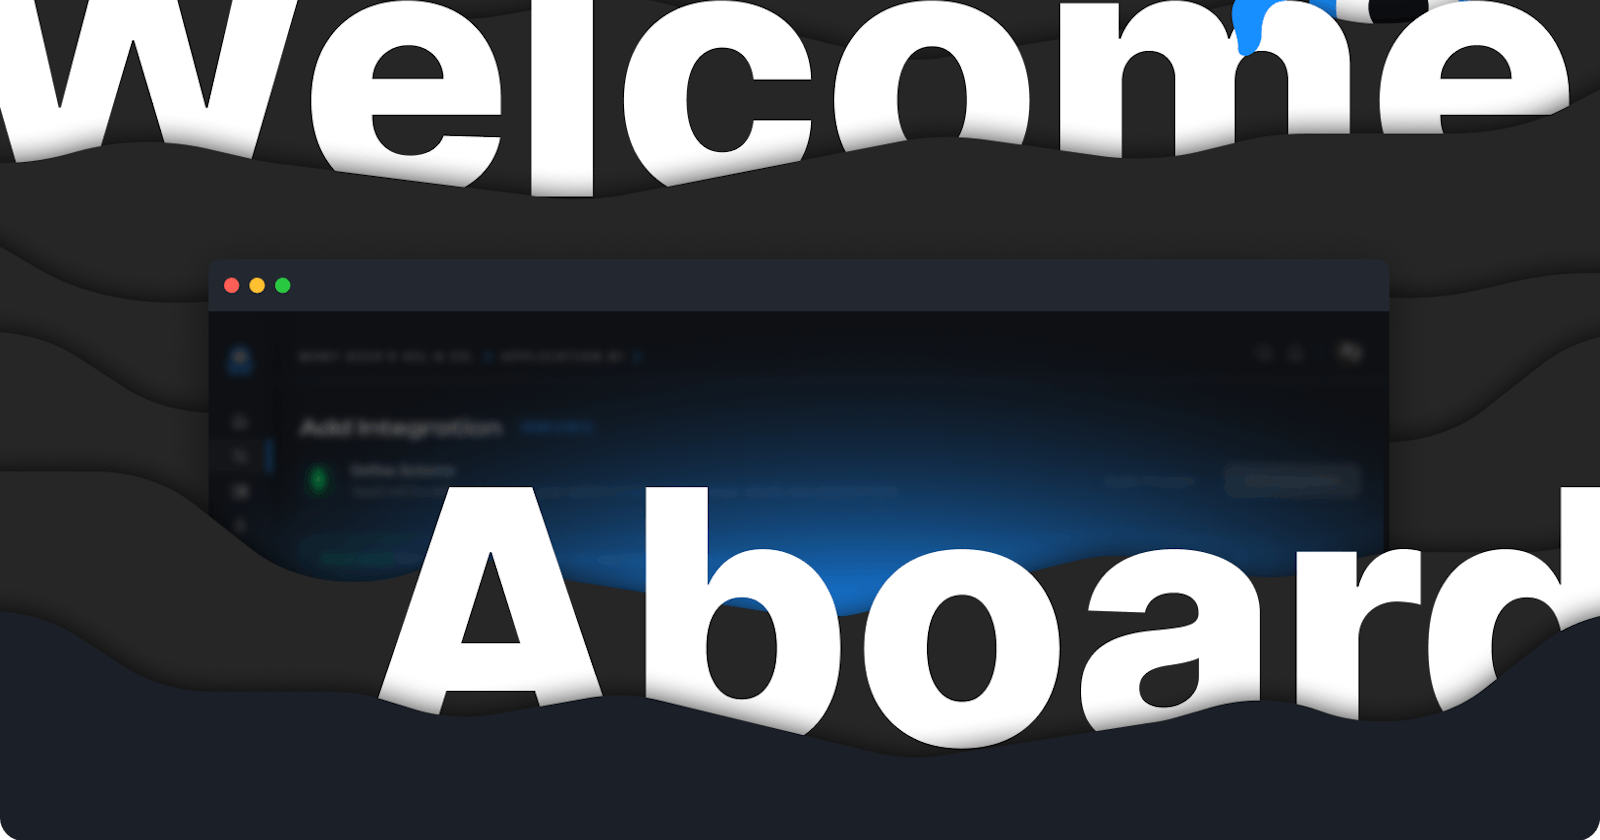 Welcome! Let me show you around